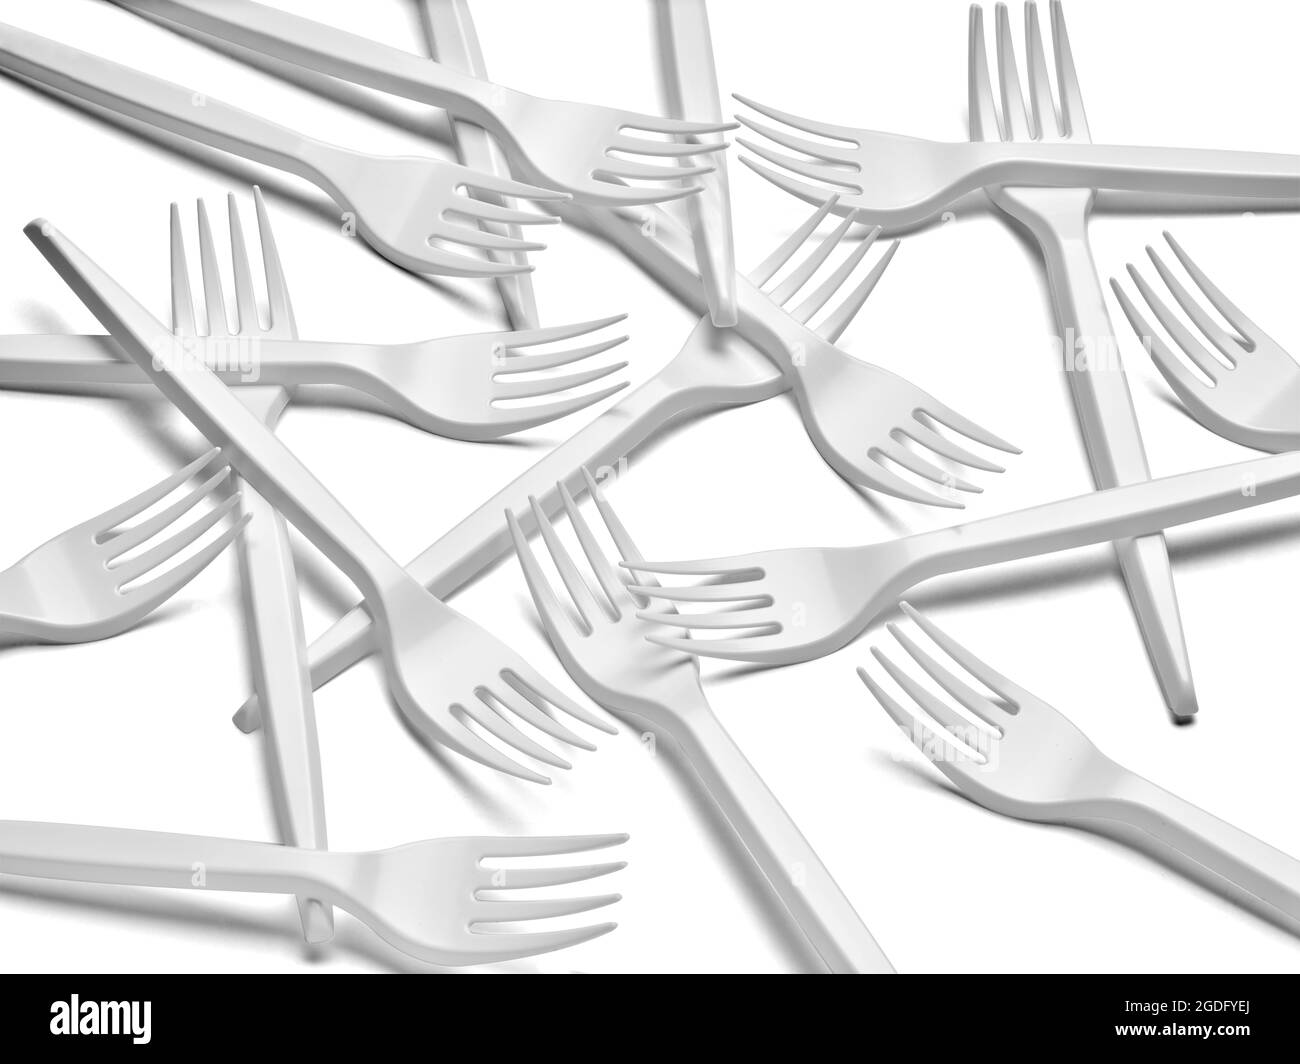 plastic cutlery fork utensil recycling disposable Stock Photo